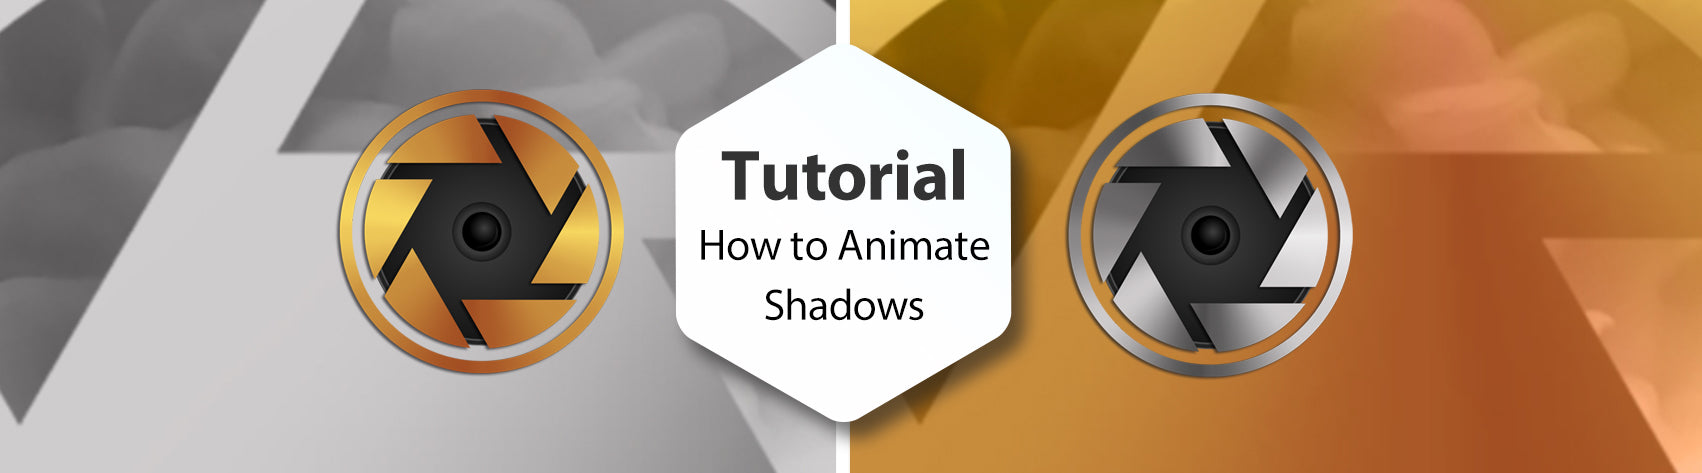 Tutorial - How to Animate Shadows in Photopia